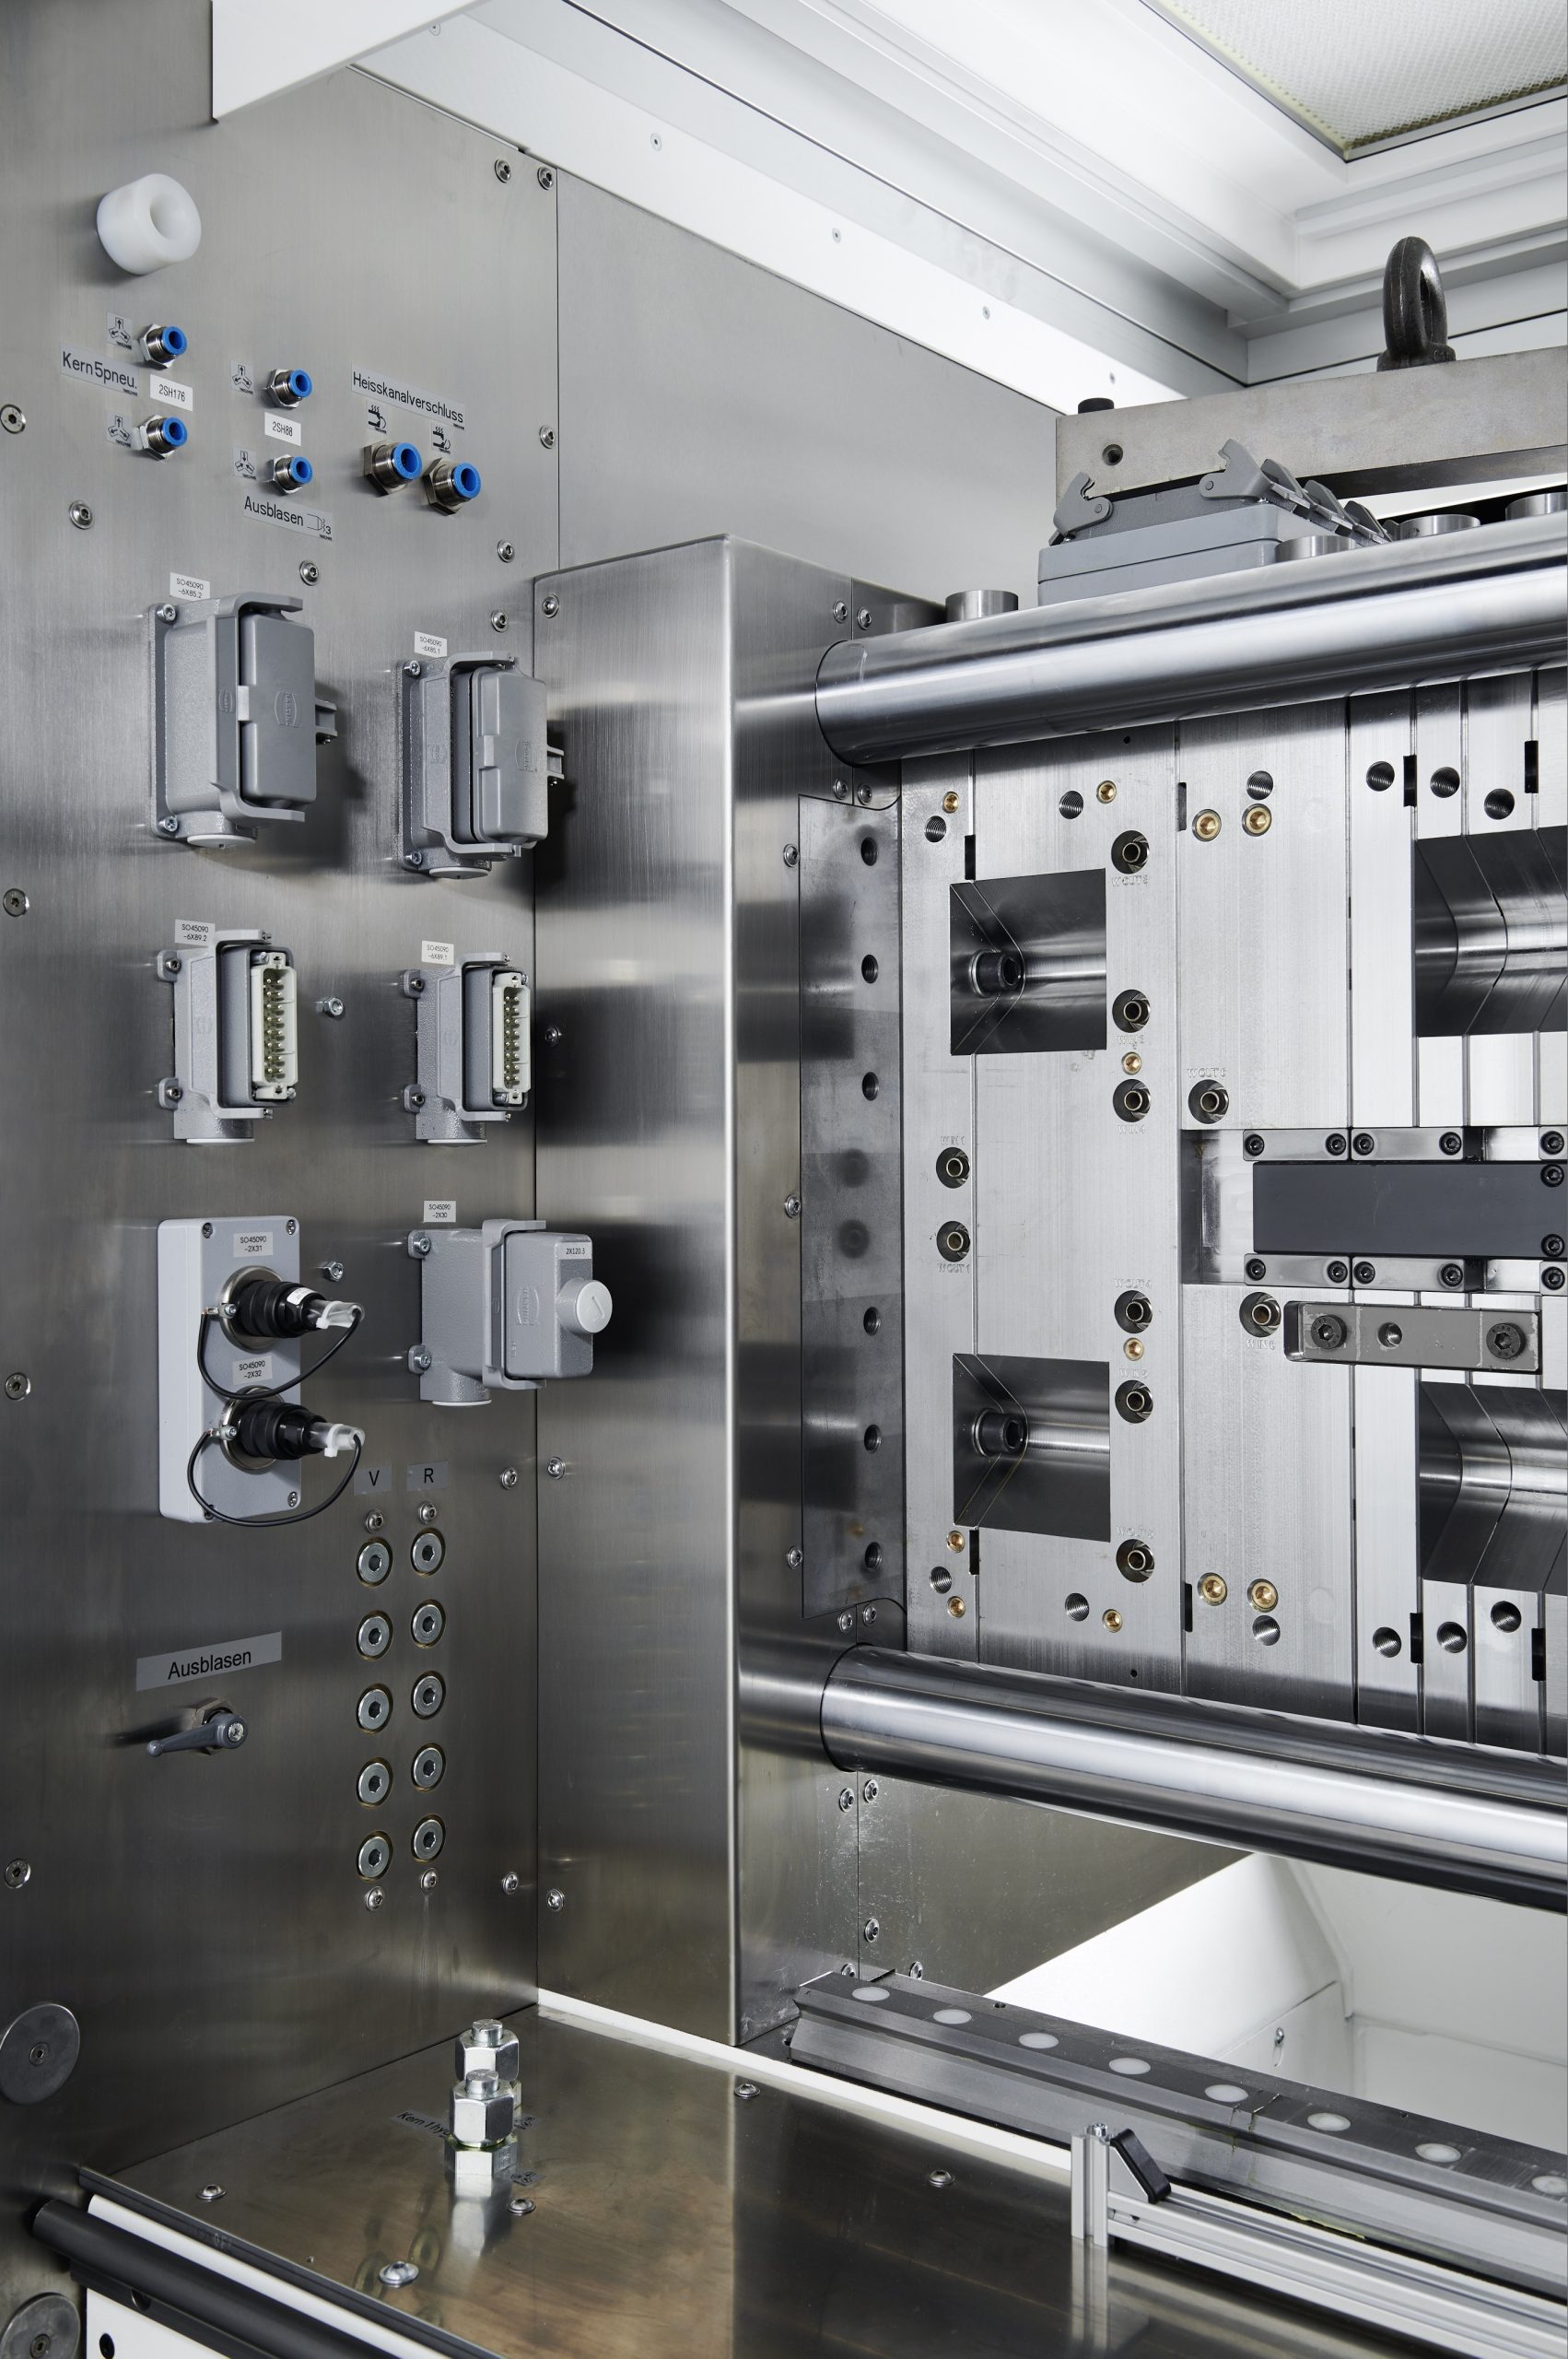 GMP compliant technical features on the medical IntElect includes total stainless steel fixed platen coverage on the top, sides and underside, without any cut outs to ensure air flow is not disturbed